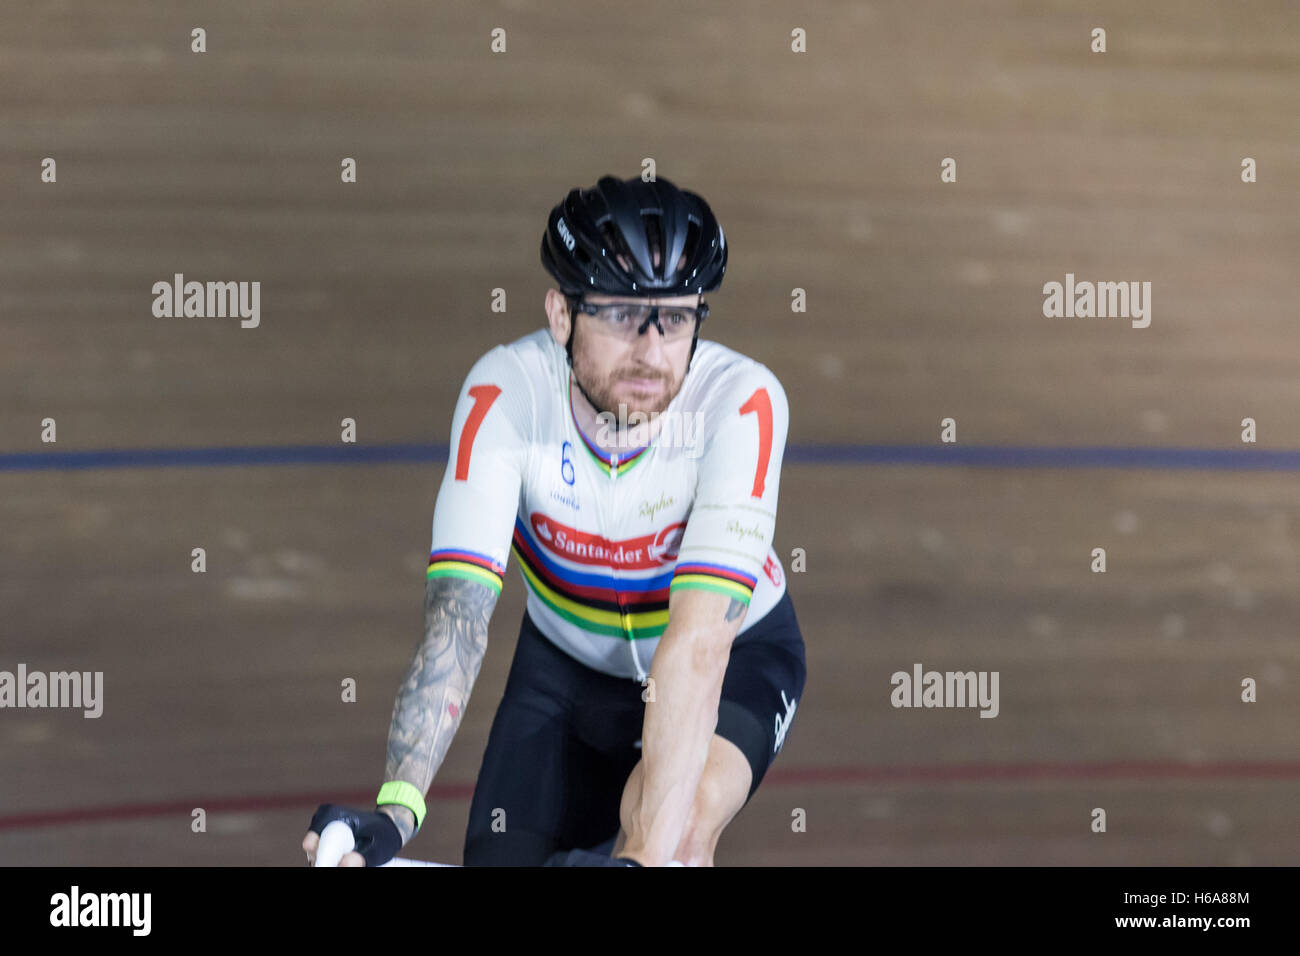 London, UK  25th October, 2016.  Bradley Wiggins. Cyclists compete  in the first day of  the London Six Day cycling event.  Lee Valley Velodrome, Olympic Park, London, UK. Copyright Carol Moir/Alamy Live News. Stock Photo